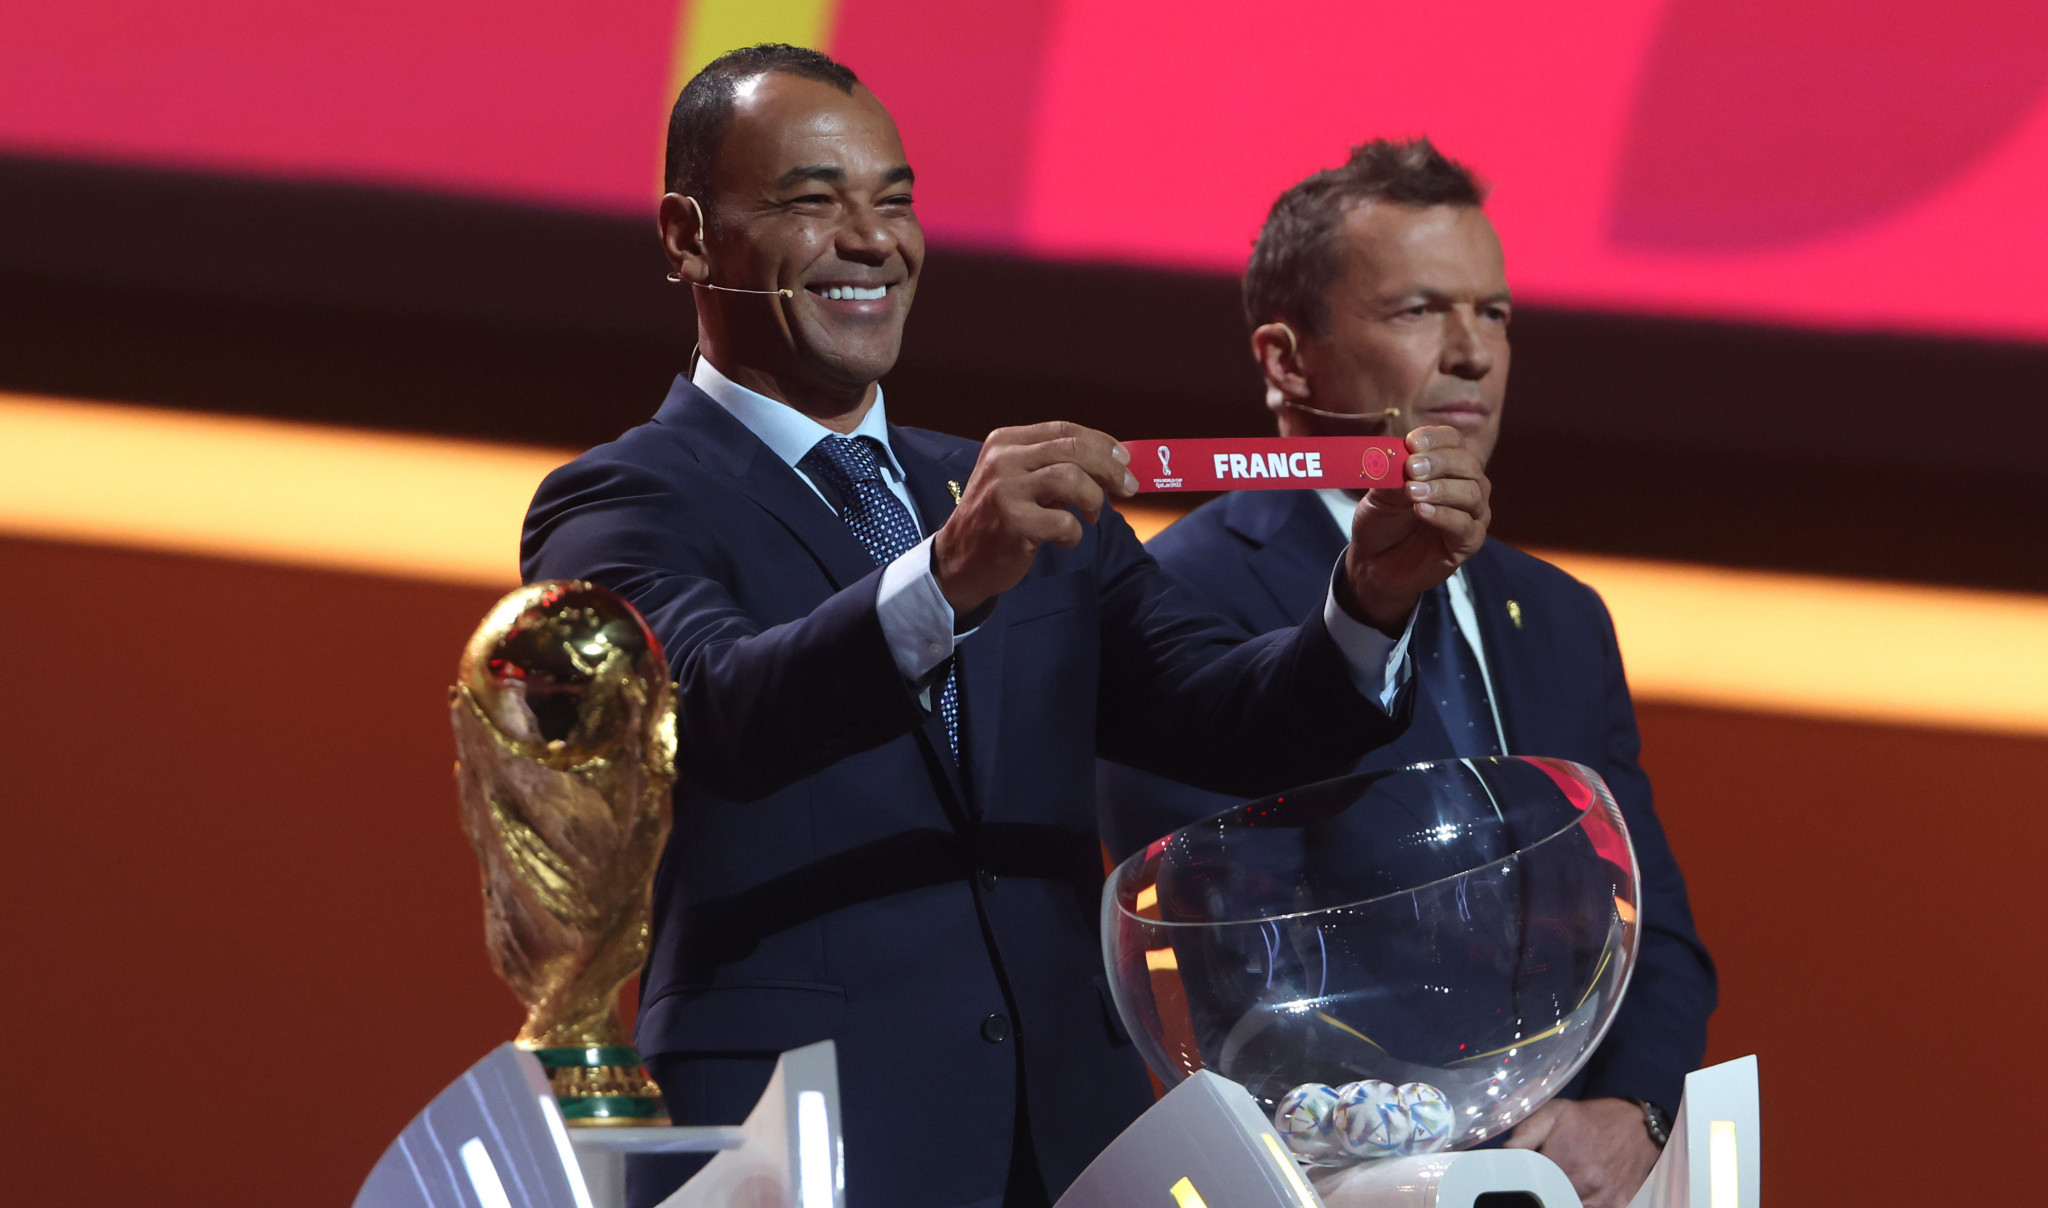 The draw for the FIFA World Cup, including Qatar 2022, is held much closer to the tournament than the one for the Rugby World Cup ©Getty Images